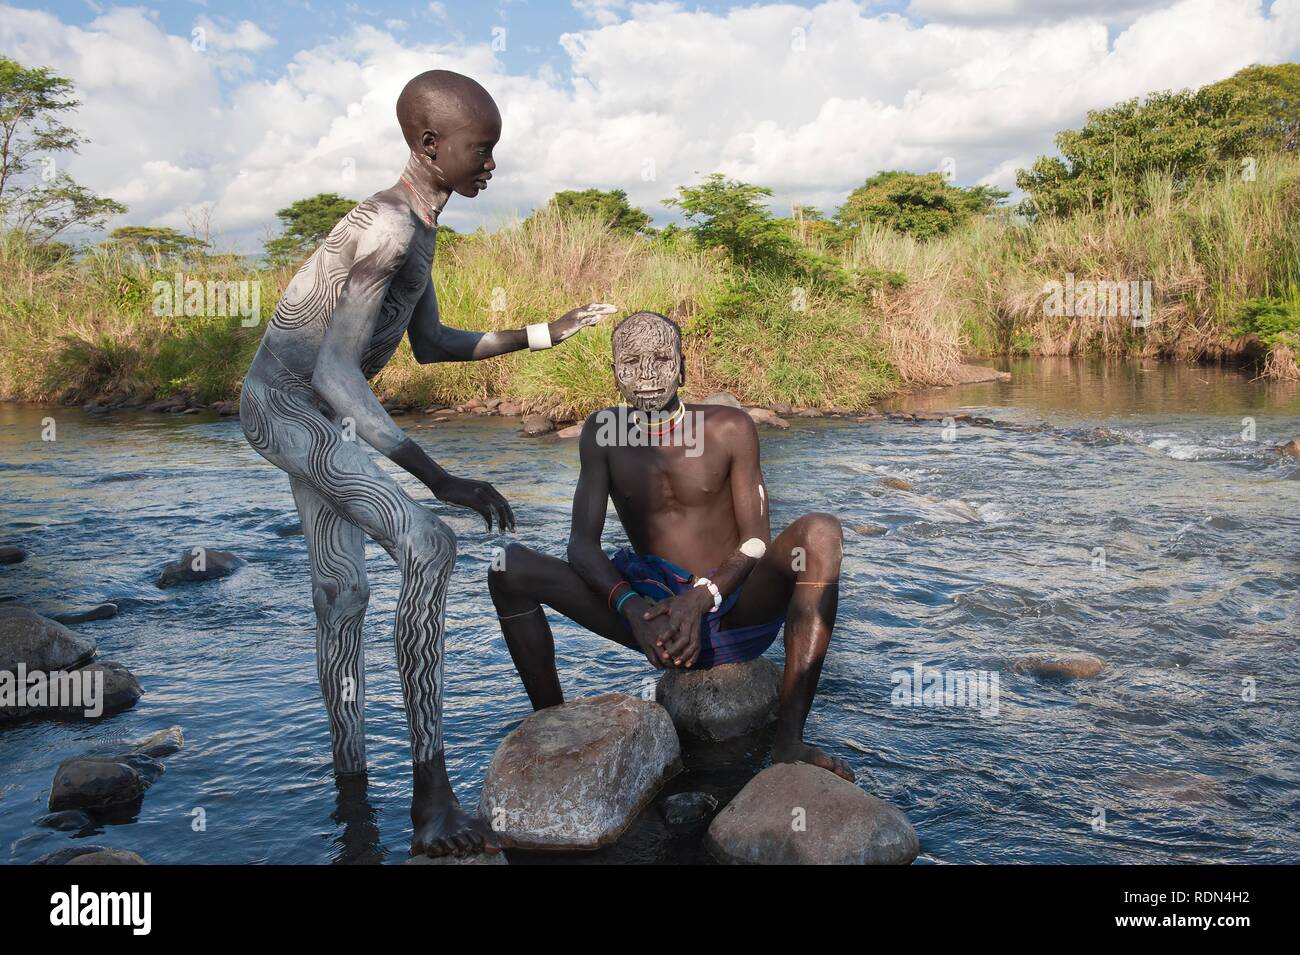 Two Surma men with facial and body paintings in the river, Kibish, Omo River Valley, Ethiopia, Africa Stock Photo